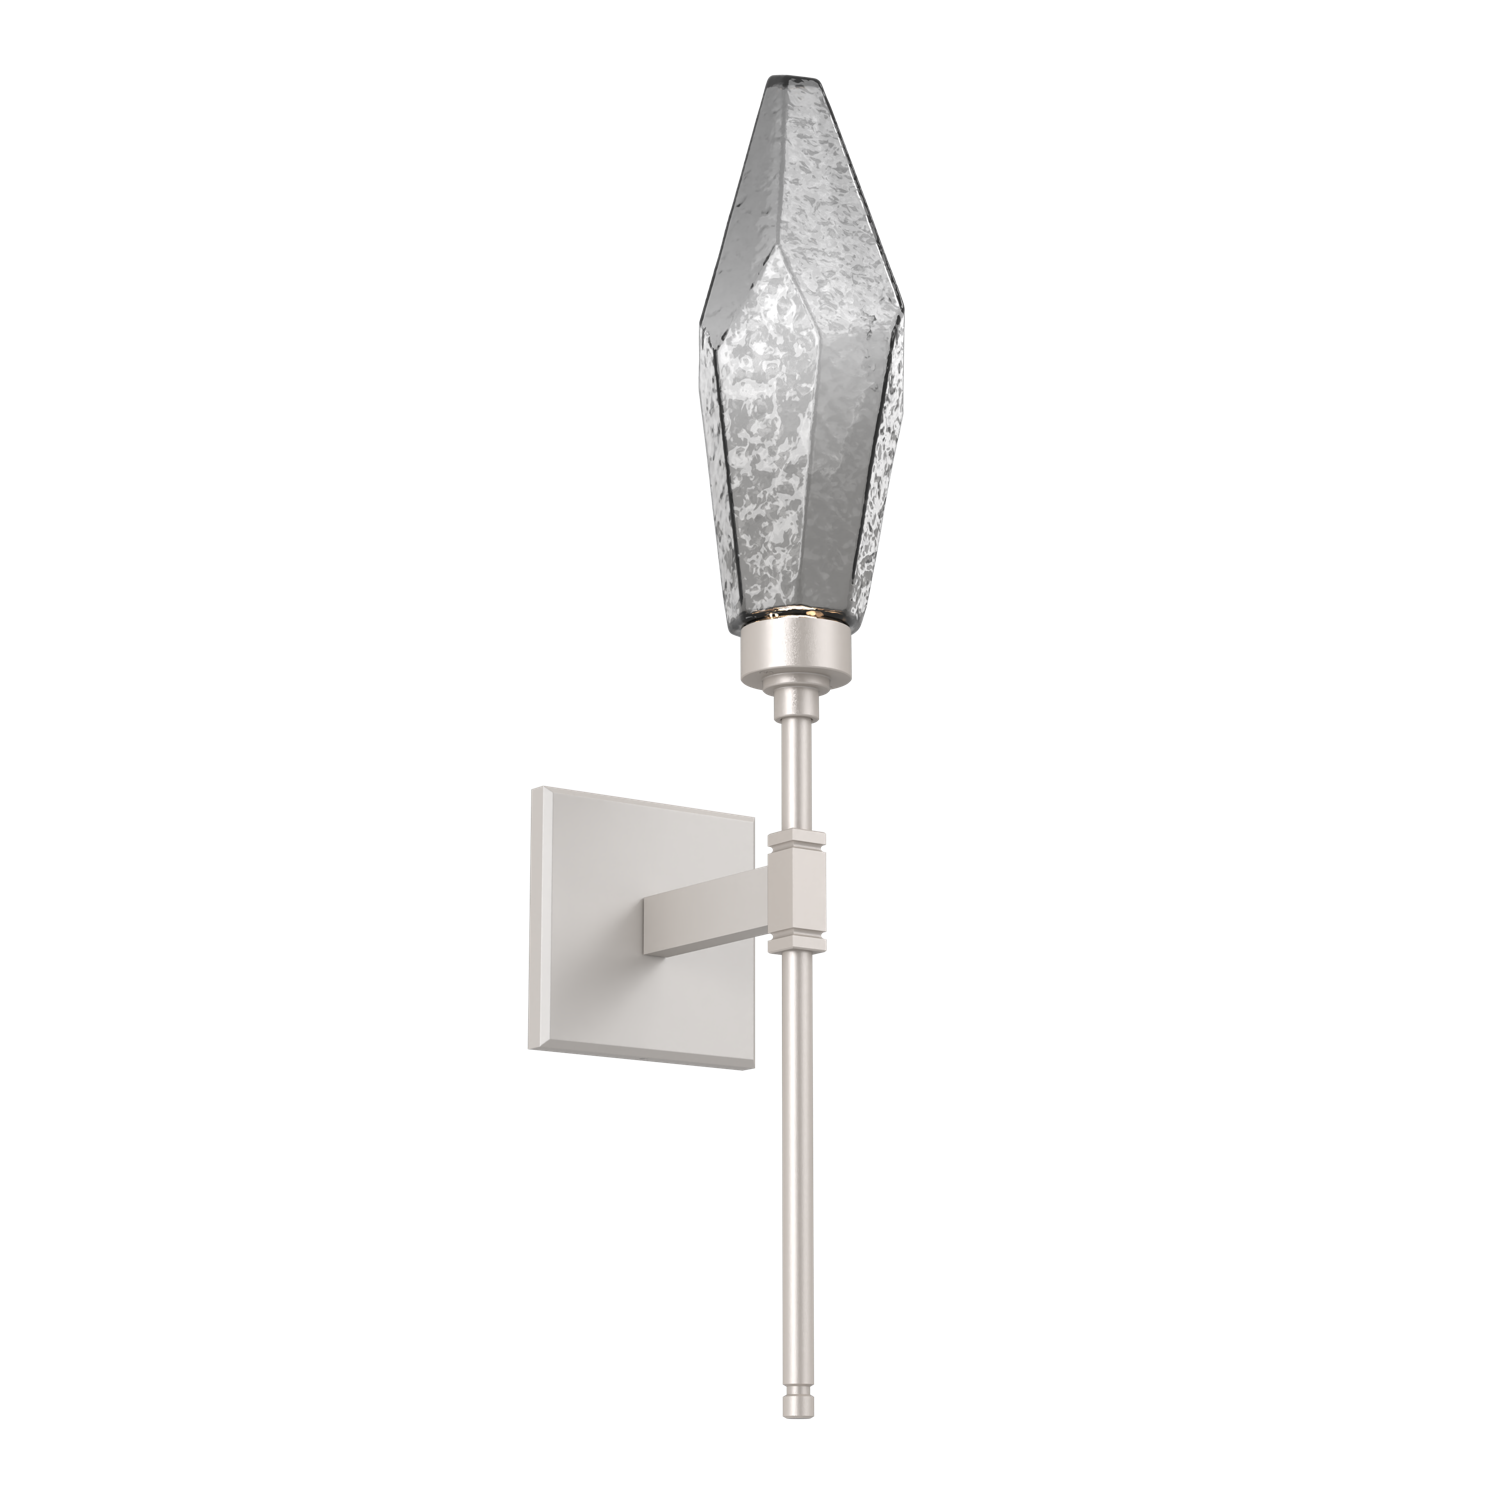 IDB0050-07-BS-CS-Hammerton-Studio-Rock-Crystal-belvedere-wall-sconce-with-beige-silver-finish-and-chilled-smoke-glass-shades-and-LED-lamping